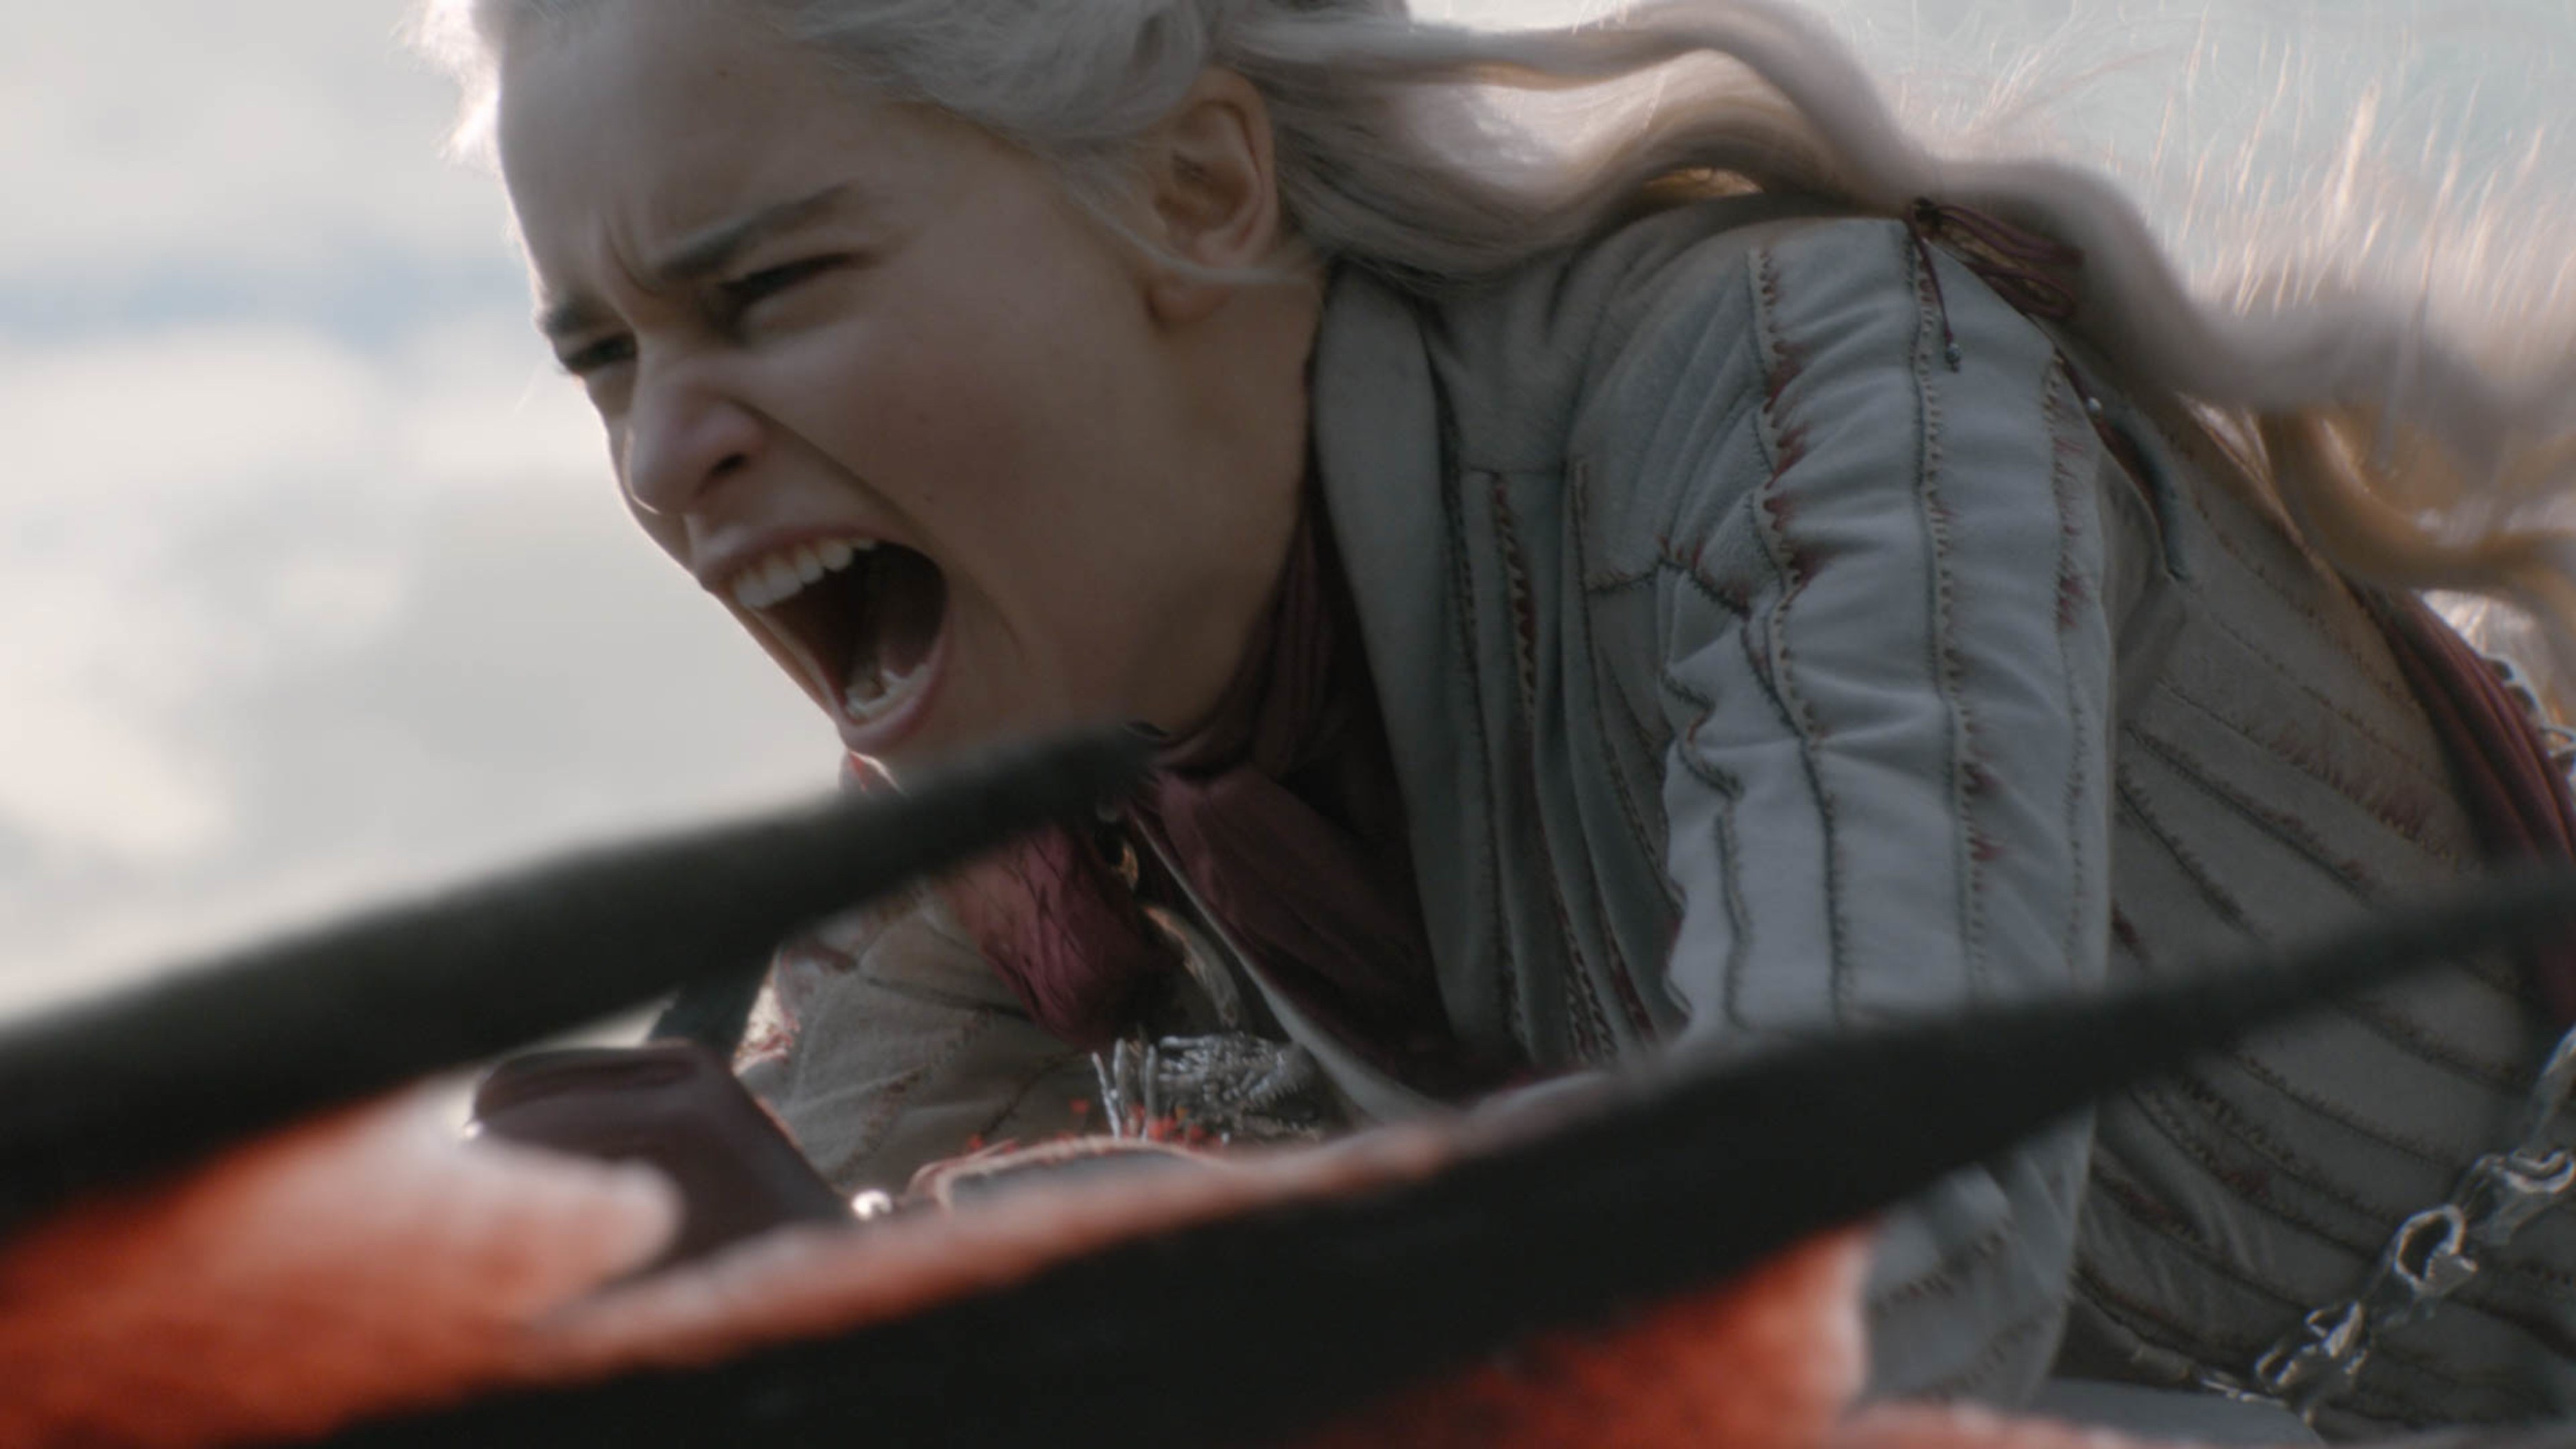 Game of Thrones S8E5 and beyond: Is it fair to consider Daenerys Targaryen a Mad Queen?